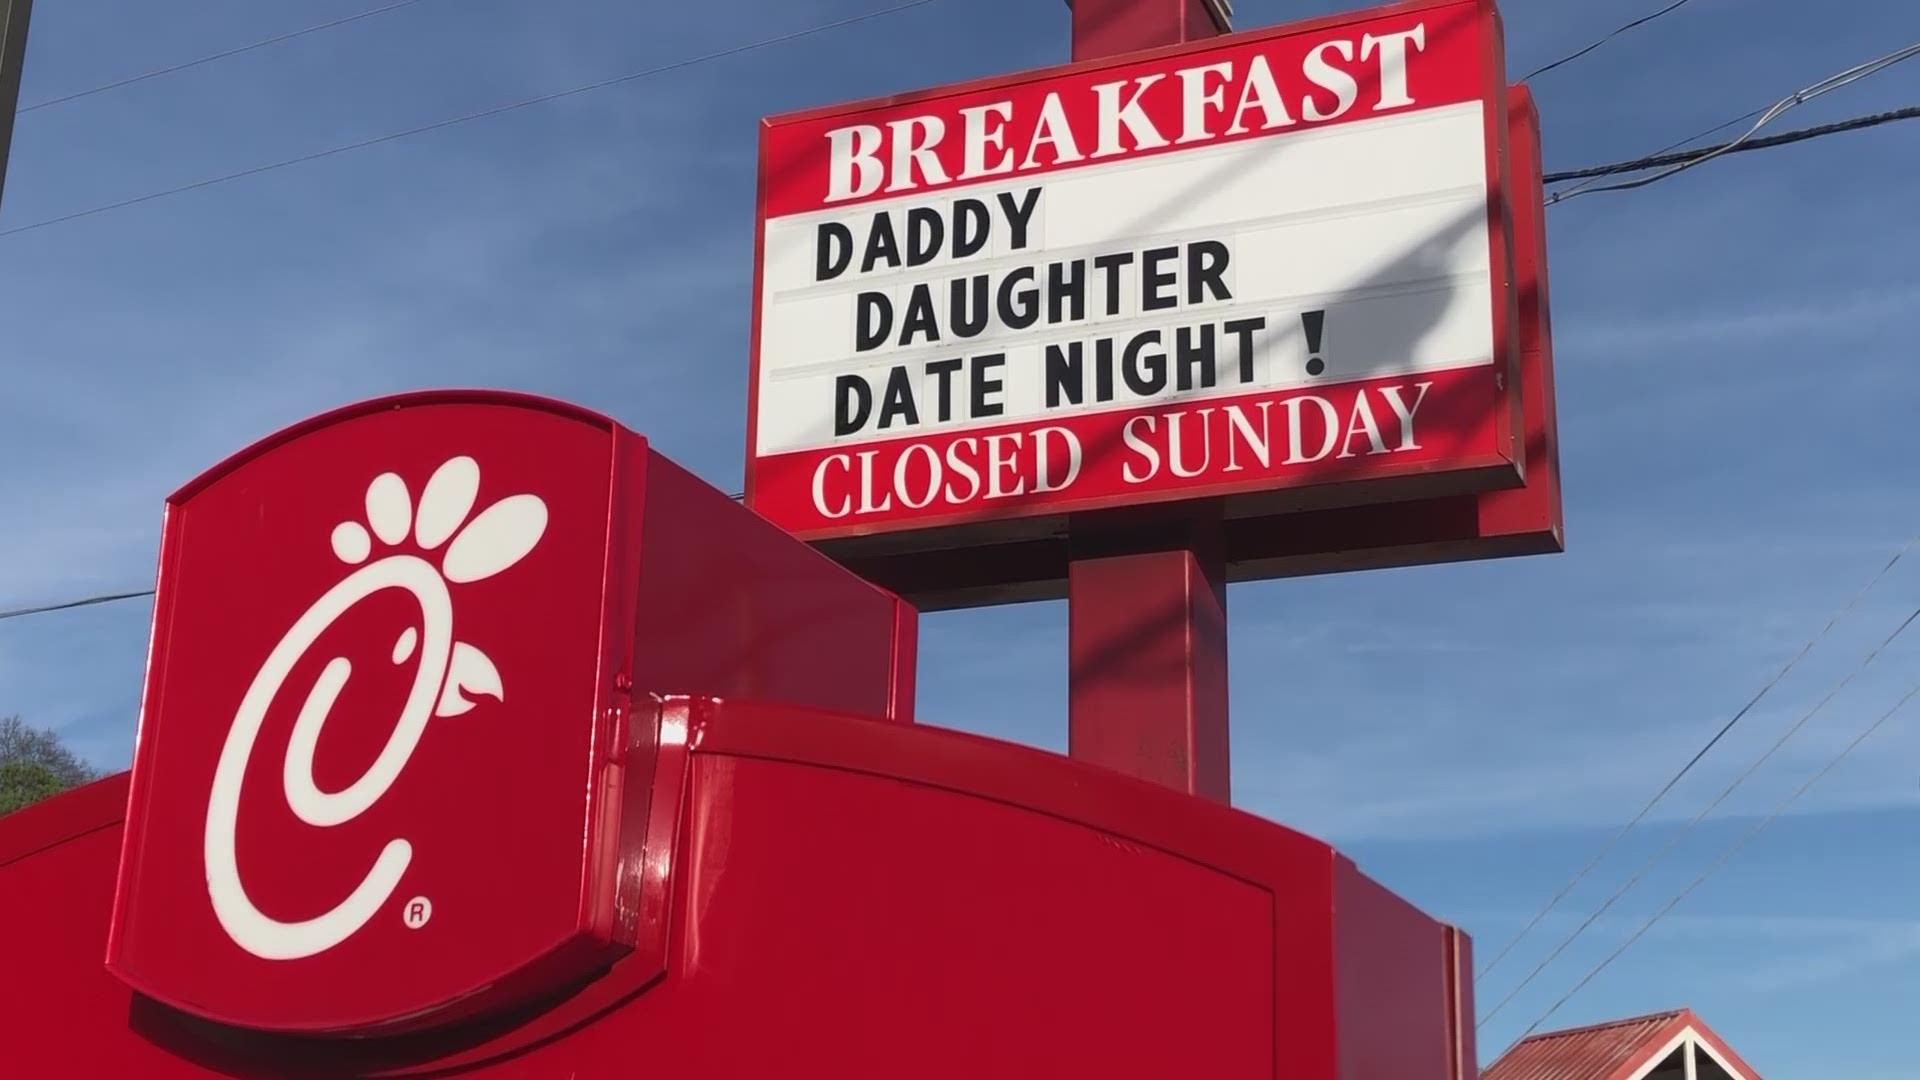 Chick-Fil-A hosted their 10th annual Daddy-Daughter Date Night